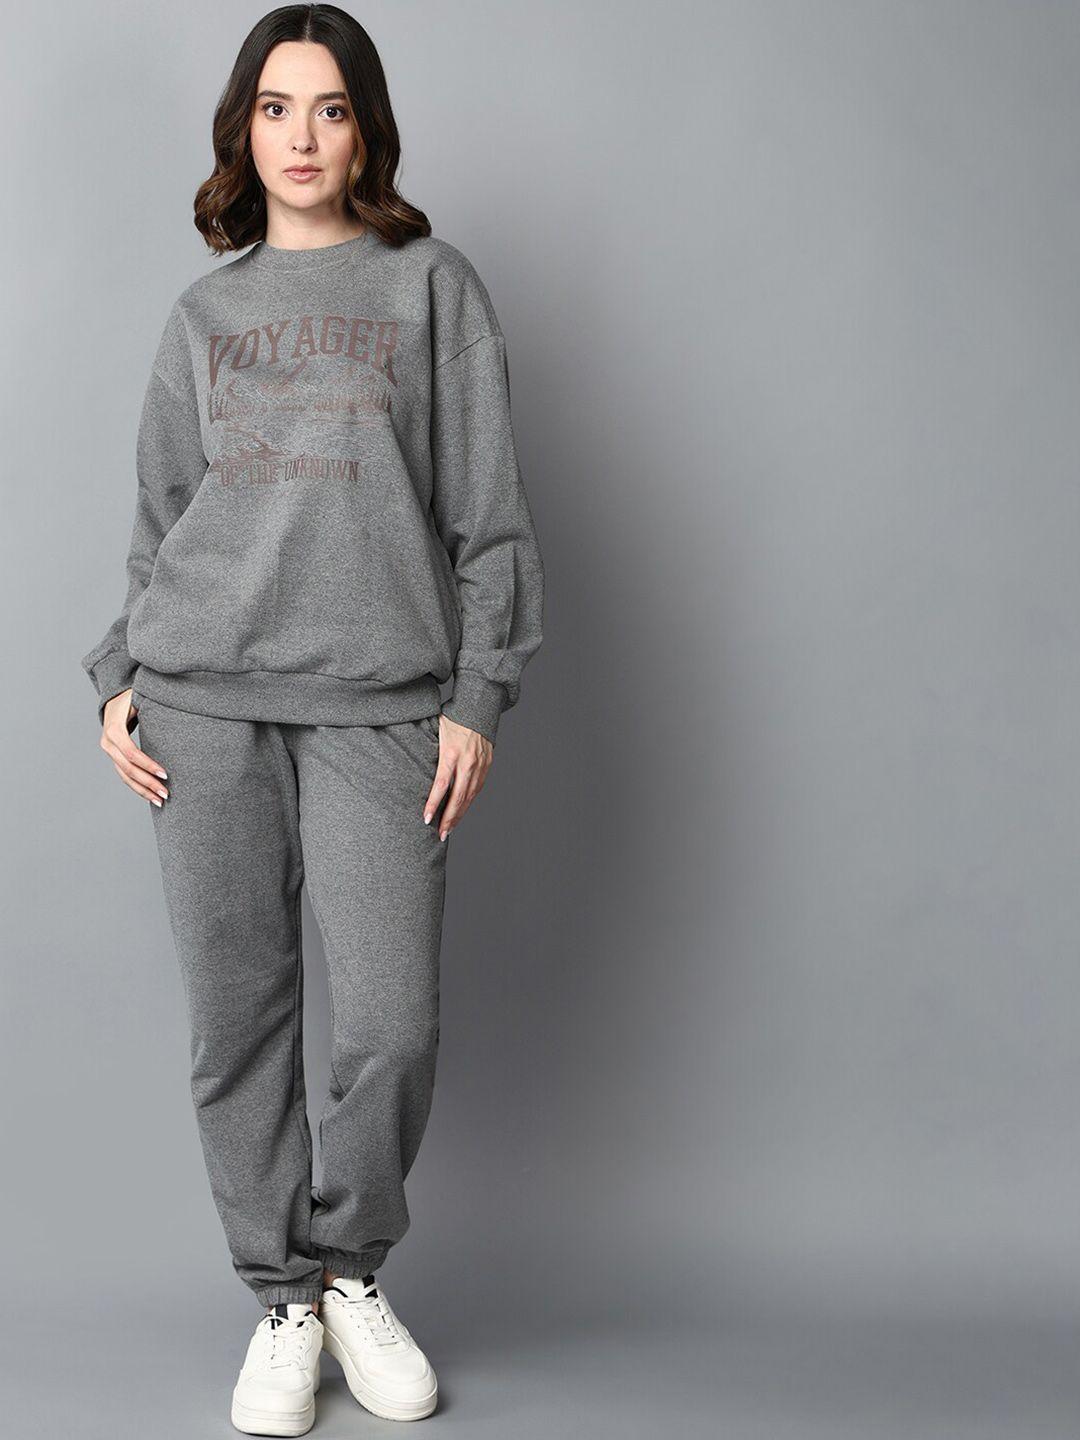 the roadster lifestyle co. grey typography printed sweatshirt & joggers tracksuit